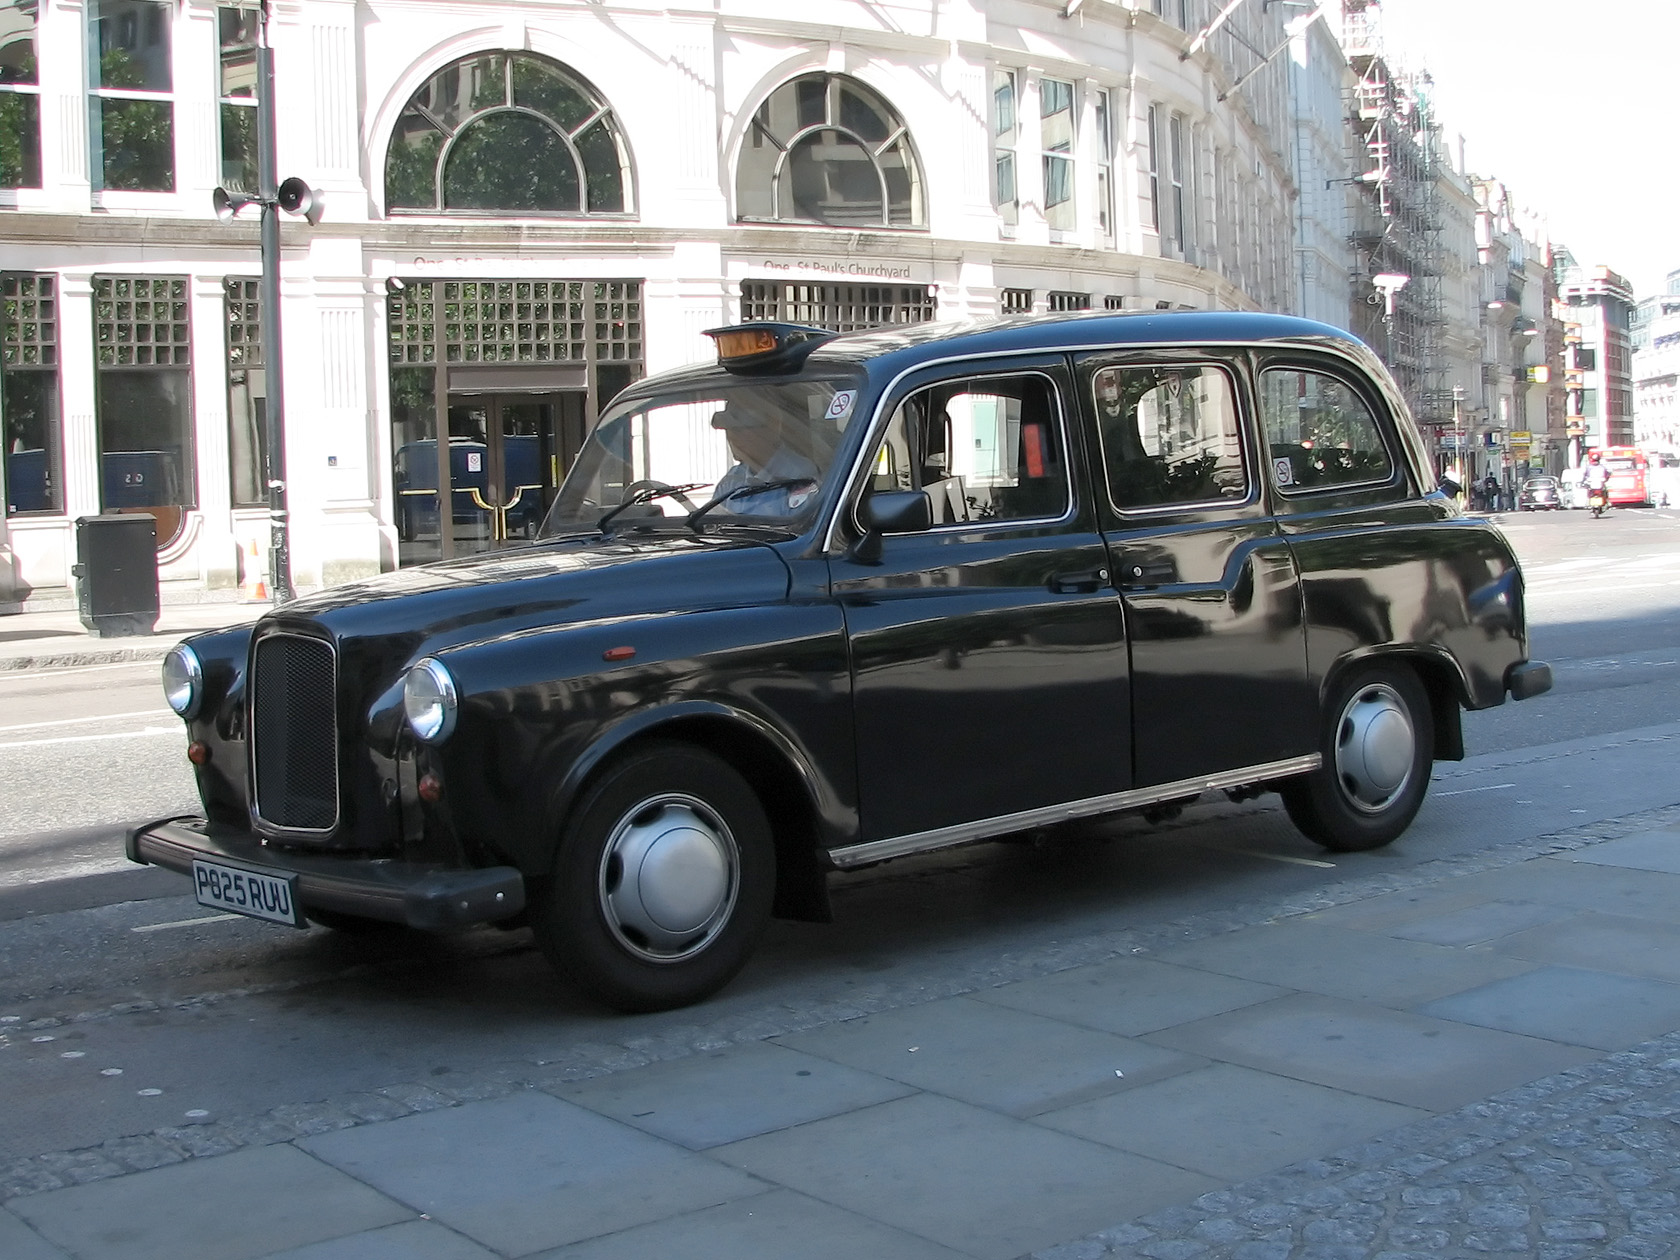 File:Austin FX4 at St Pauls cathedral.jpg - Wikimedia Commons